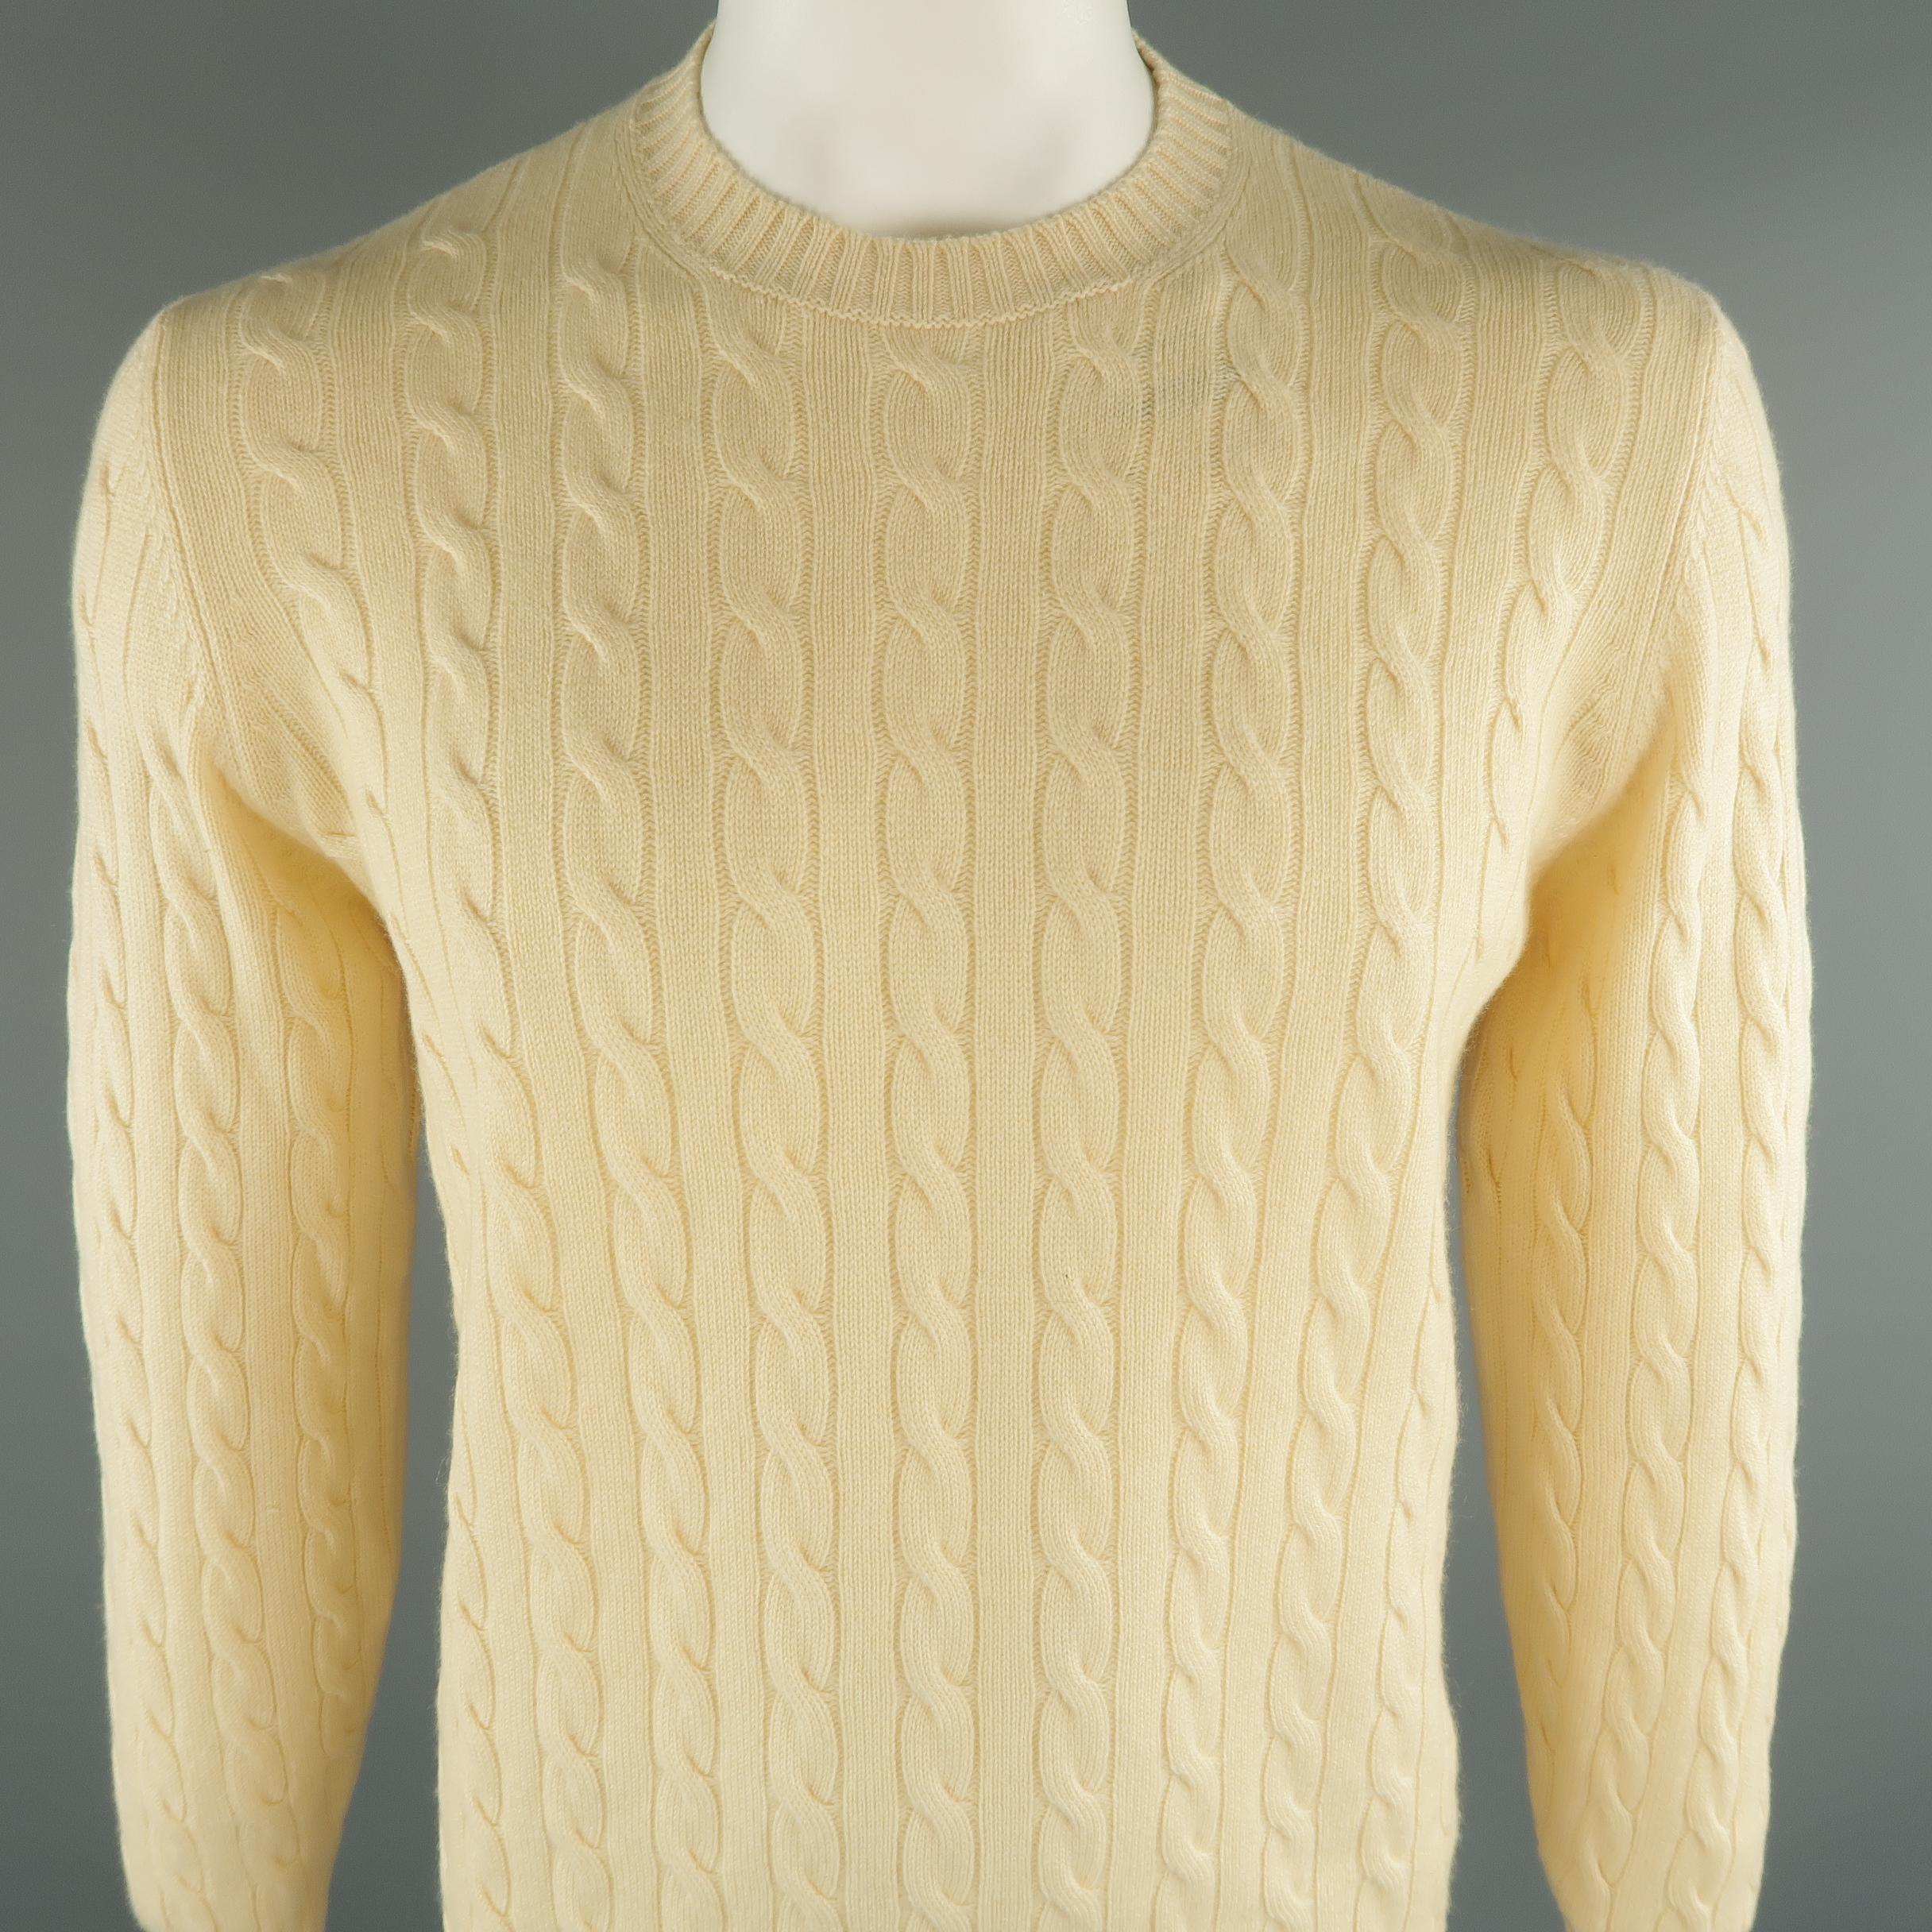 BRUNELLO CUCINELLI sweater comes in 100% cashmere beige tone in cable knit, with a suede elbow patches, crewneck and ribbed cuff and waistband. Made in Italy.
 
New with tags.
Marked: 52 IT
 
Measurements:
 
Shoulder: 18 in.
Chest: 46 in.
Sleeve: